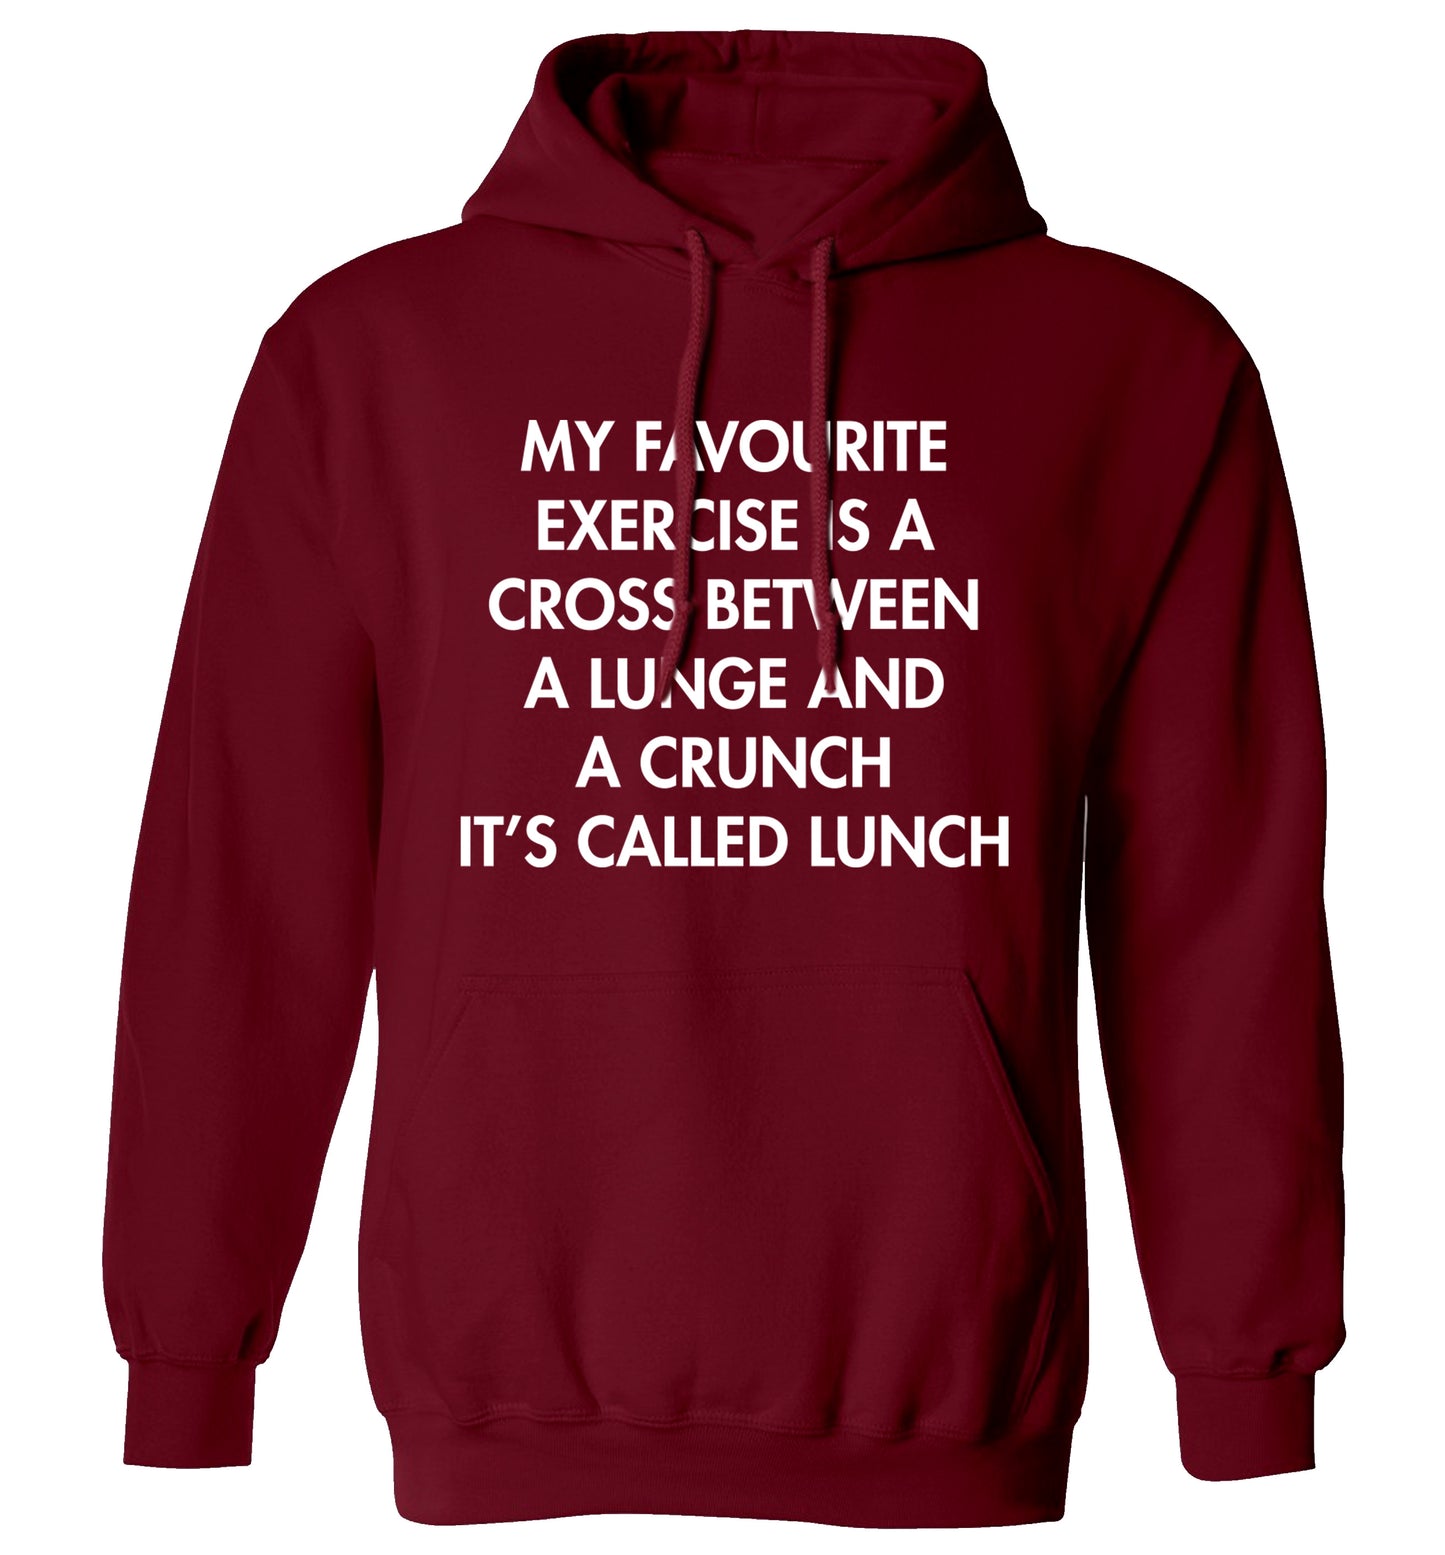 My favourite exercise is a cross between a lung and a crunch it's called lunch adults unisex maroon hoodie 2XL